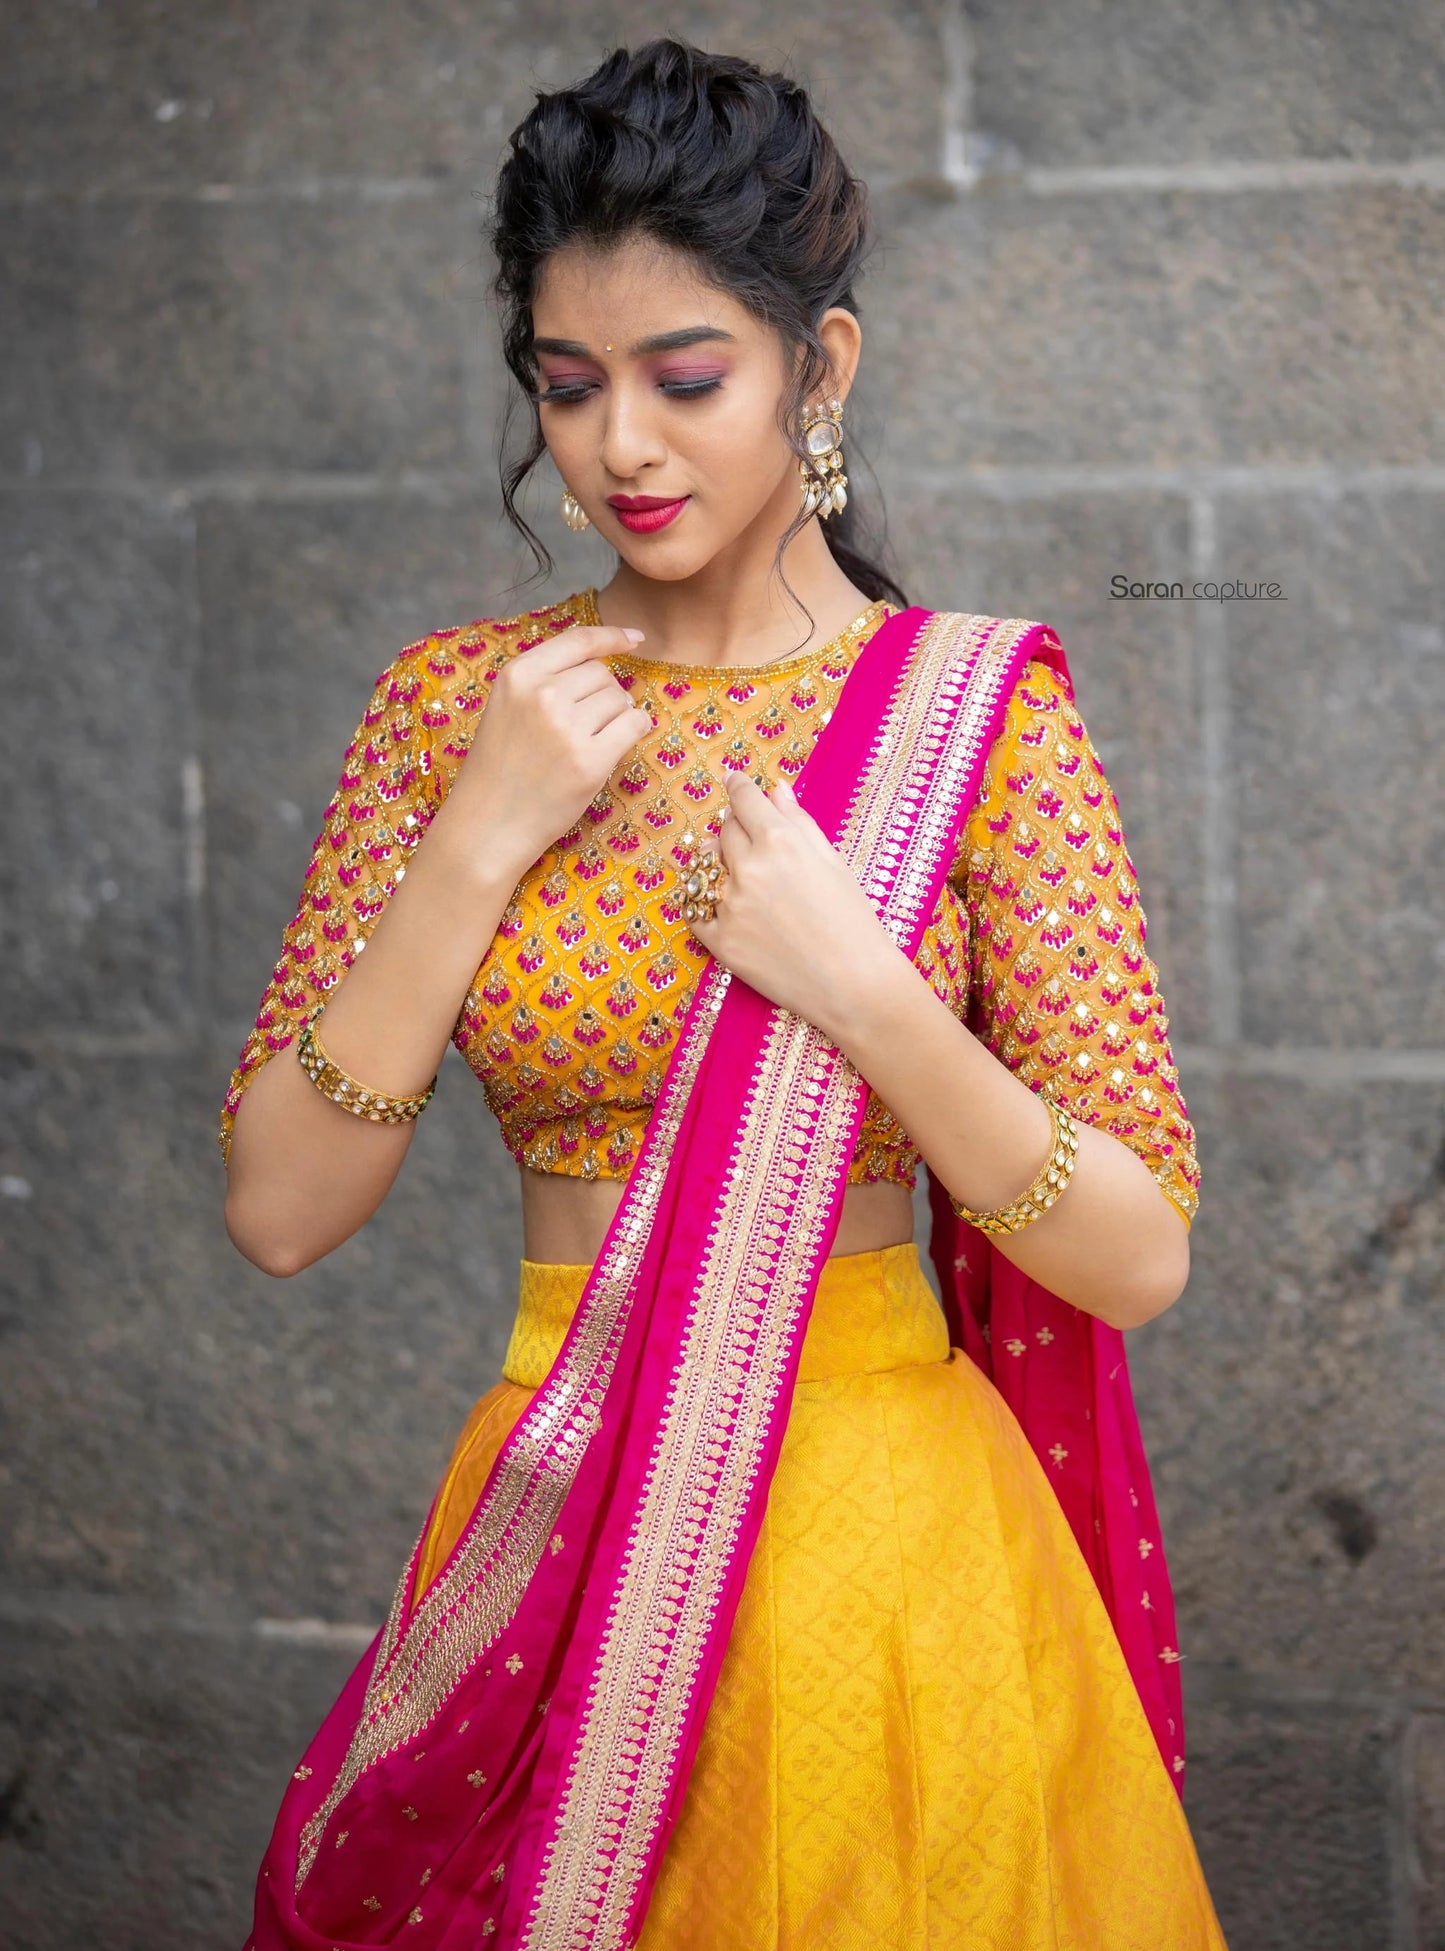 Captivating South Indian Festival Traditional Half Saree: Embrace Timeless Elegance! 💃✨